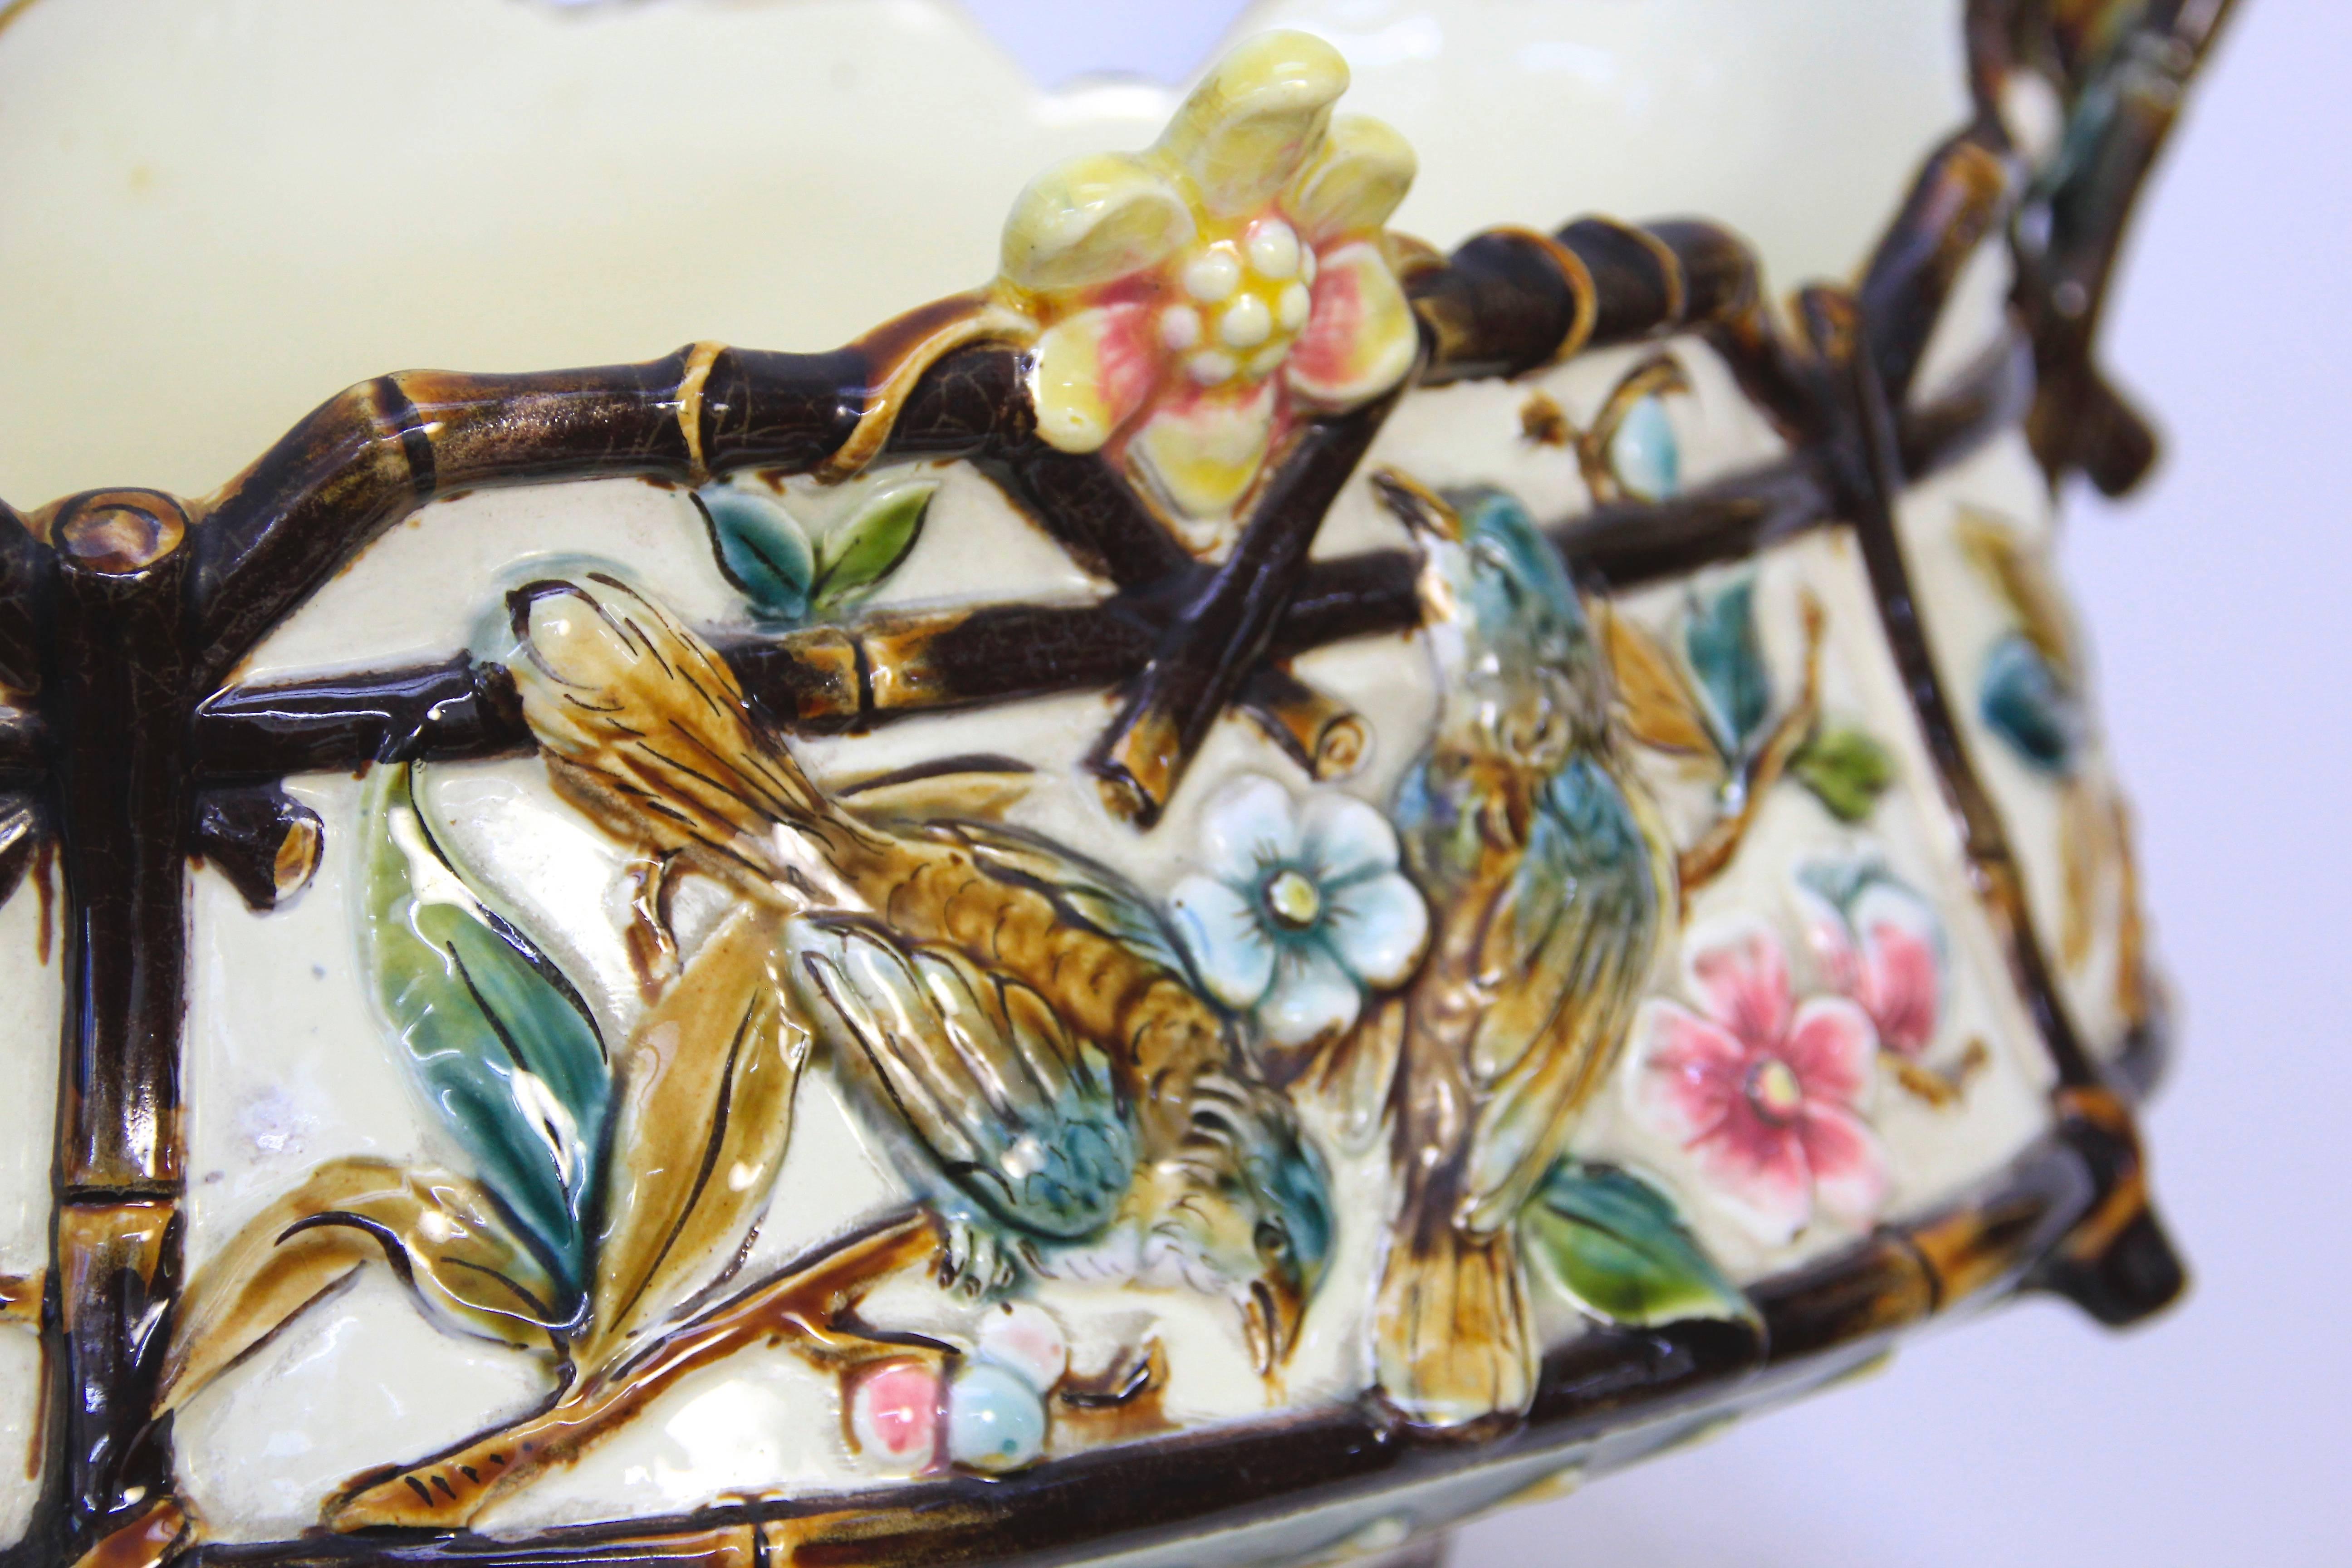 Richly decorated ceramic jardiniere made by the workshops of Znaimo, Czech Republic from, circa 1900. Lavishly decorated with hand-painted organic and floral design, this decorative jardiniere is hallmarked with the "flower hallmark" and